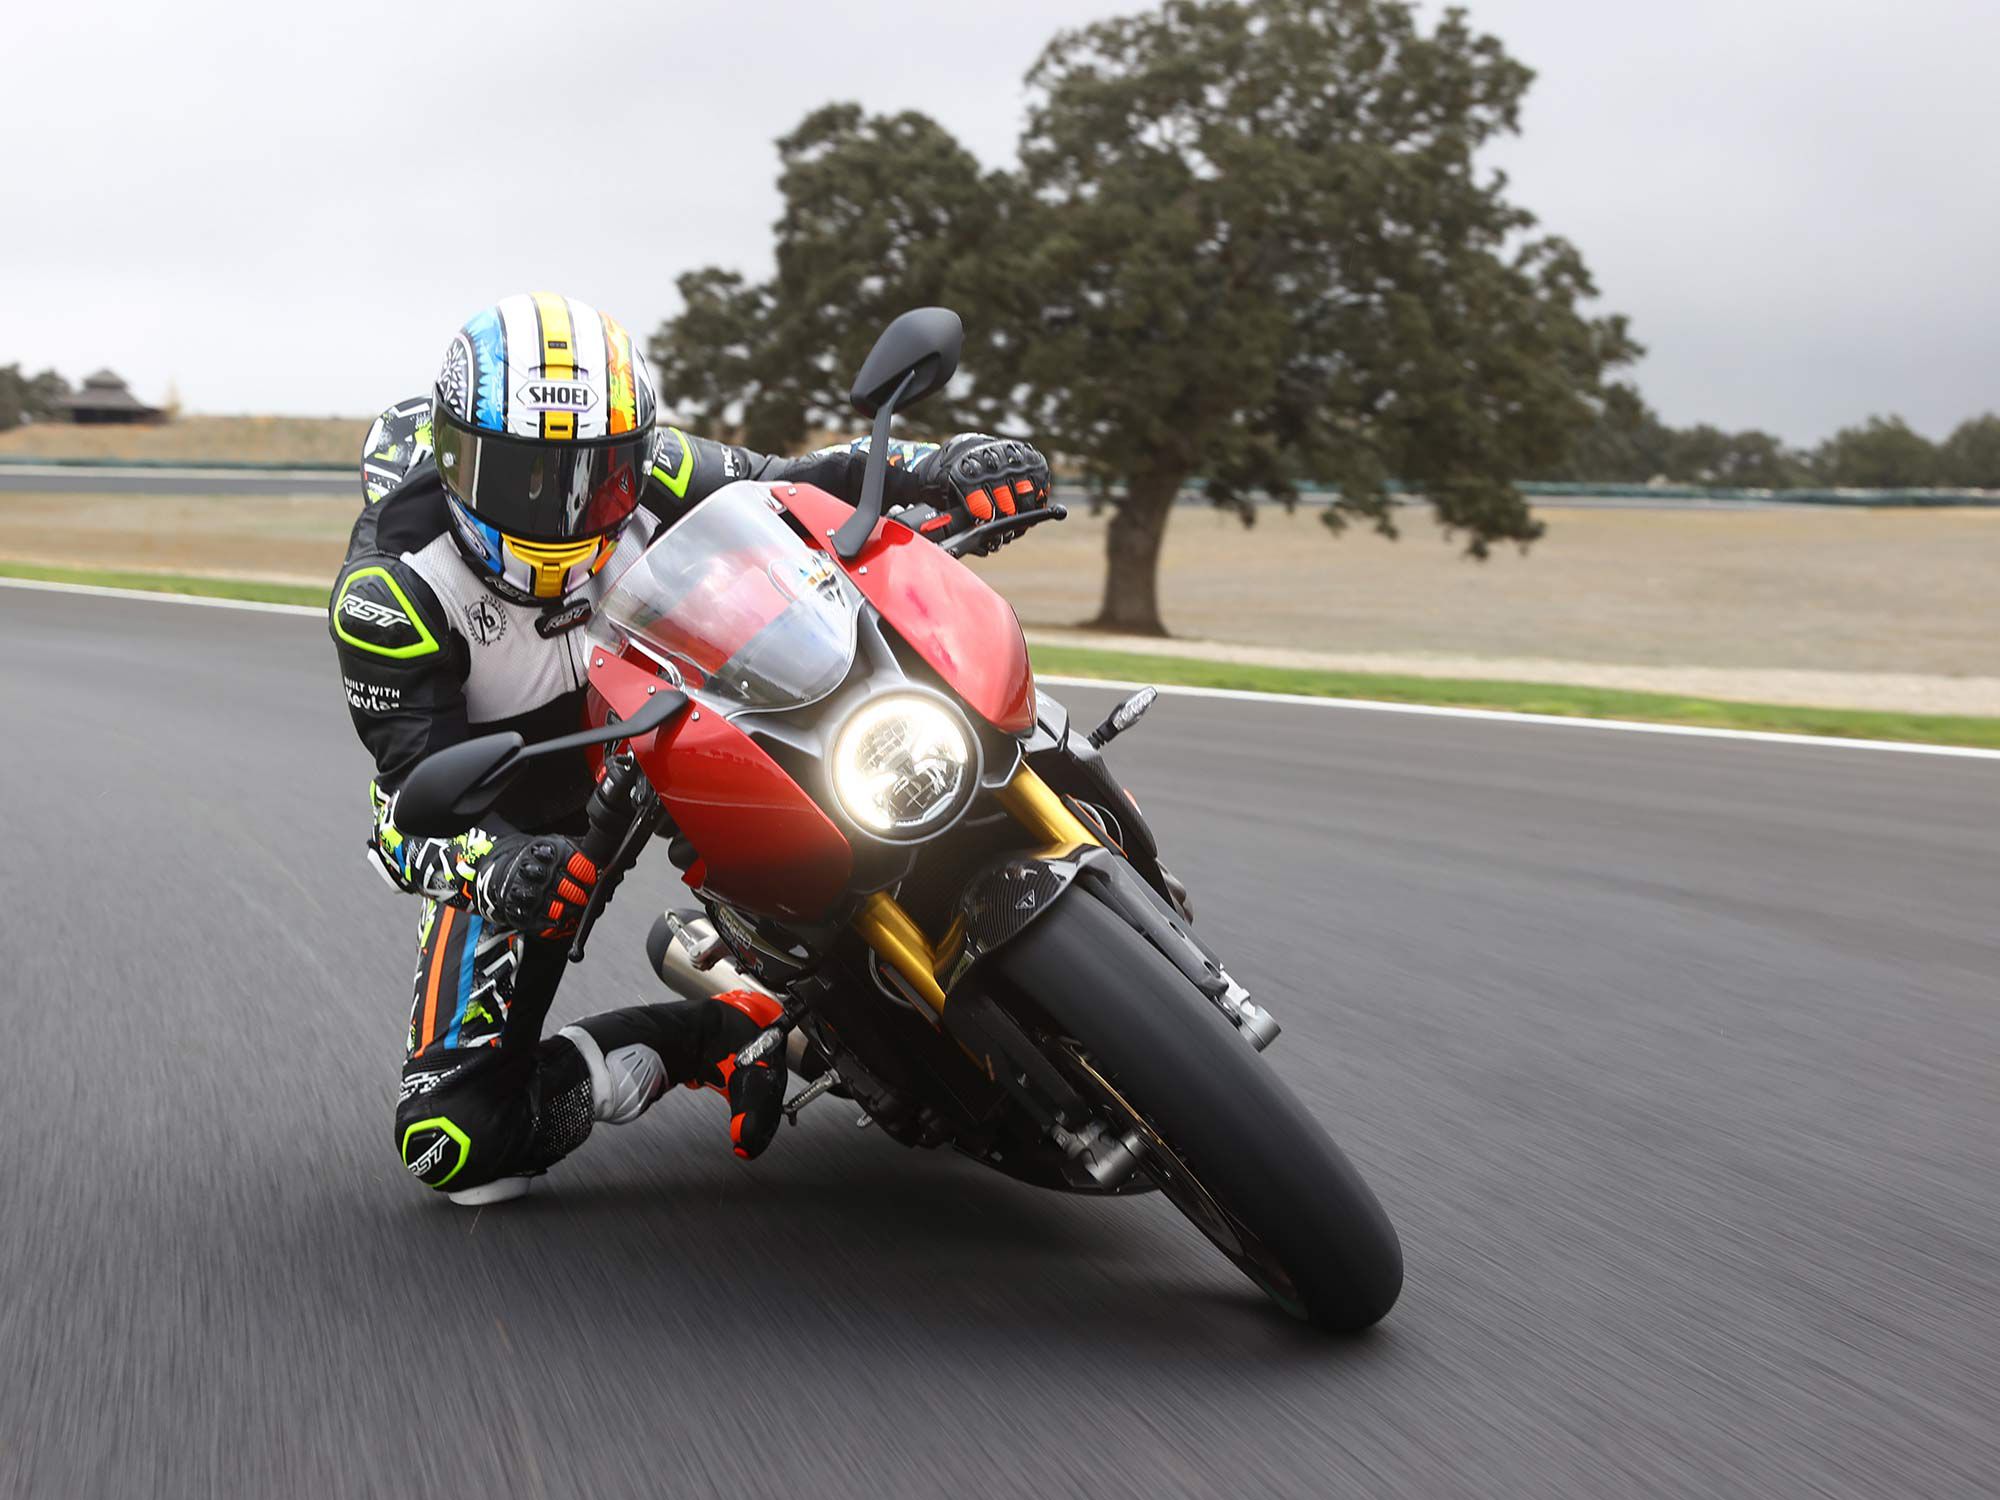 Pirelli Diablo Supercorsa SP V3 rubber is standard, meaning racetrack performance for the road with a dual-compound rear. Triumph also approved the Pirelli Diablo Supercorsa SC3 V3 for track use.